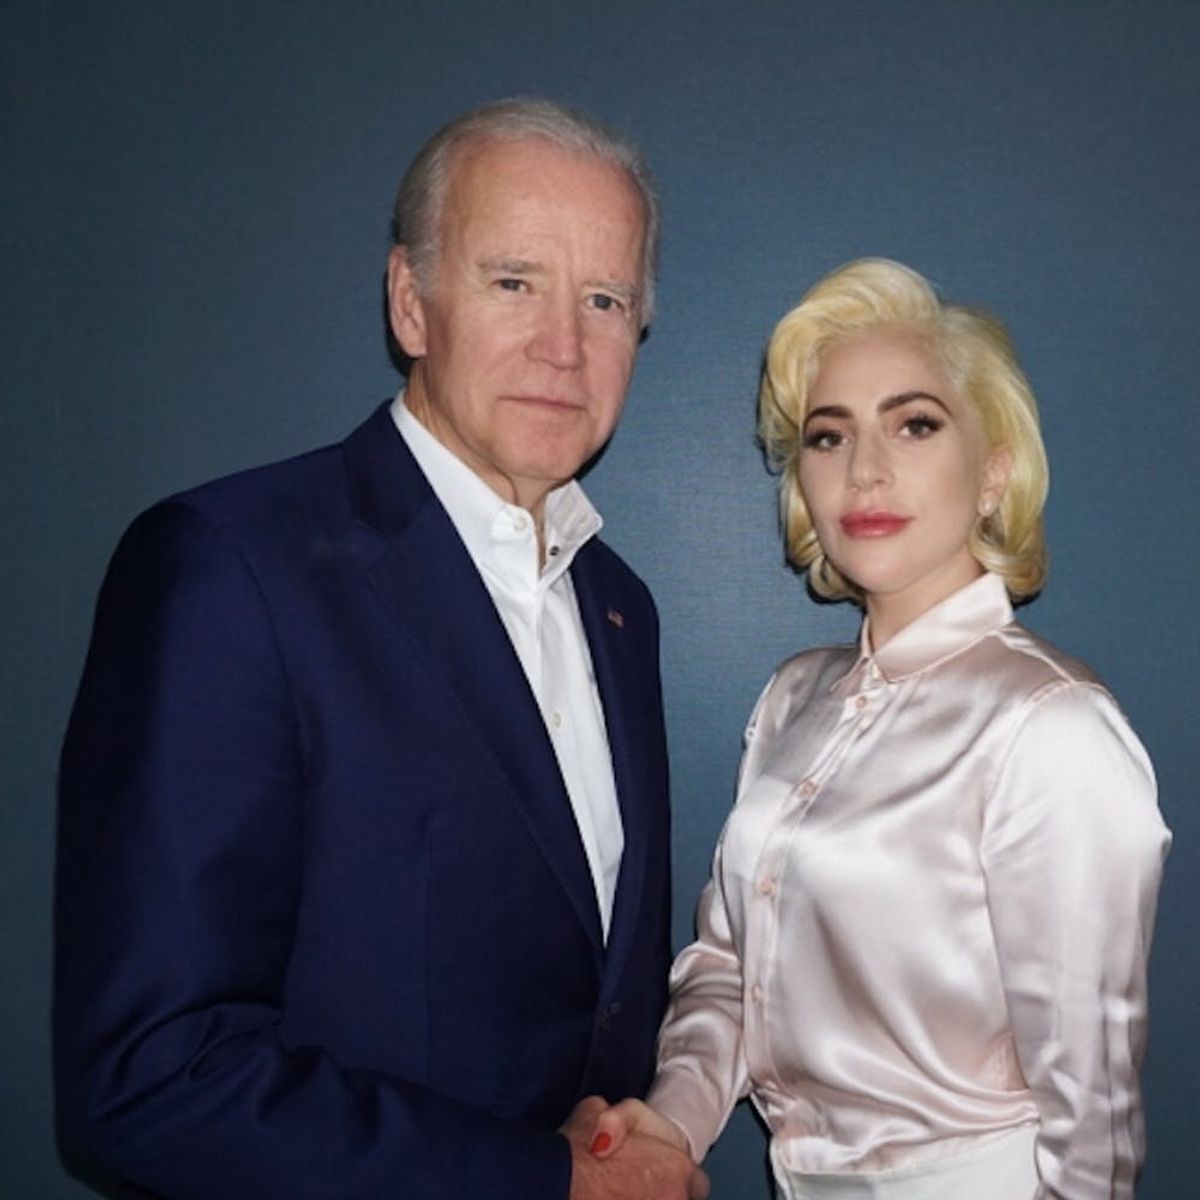 Lady Gaga Is Teaming Up With Joe Biden to Promote Accountability for Sexual Assault